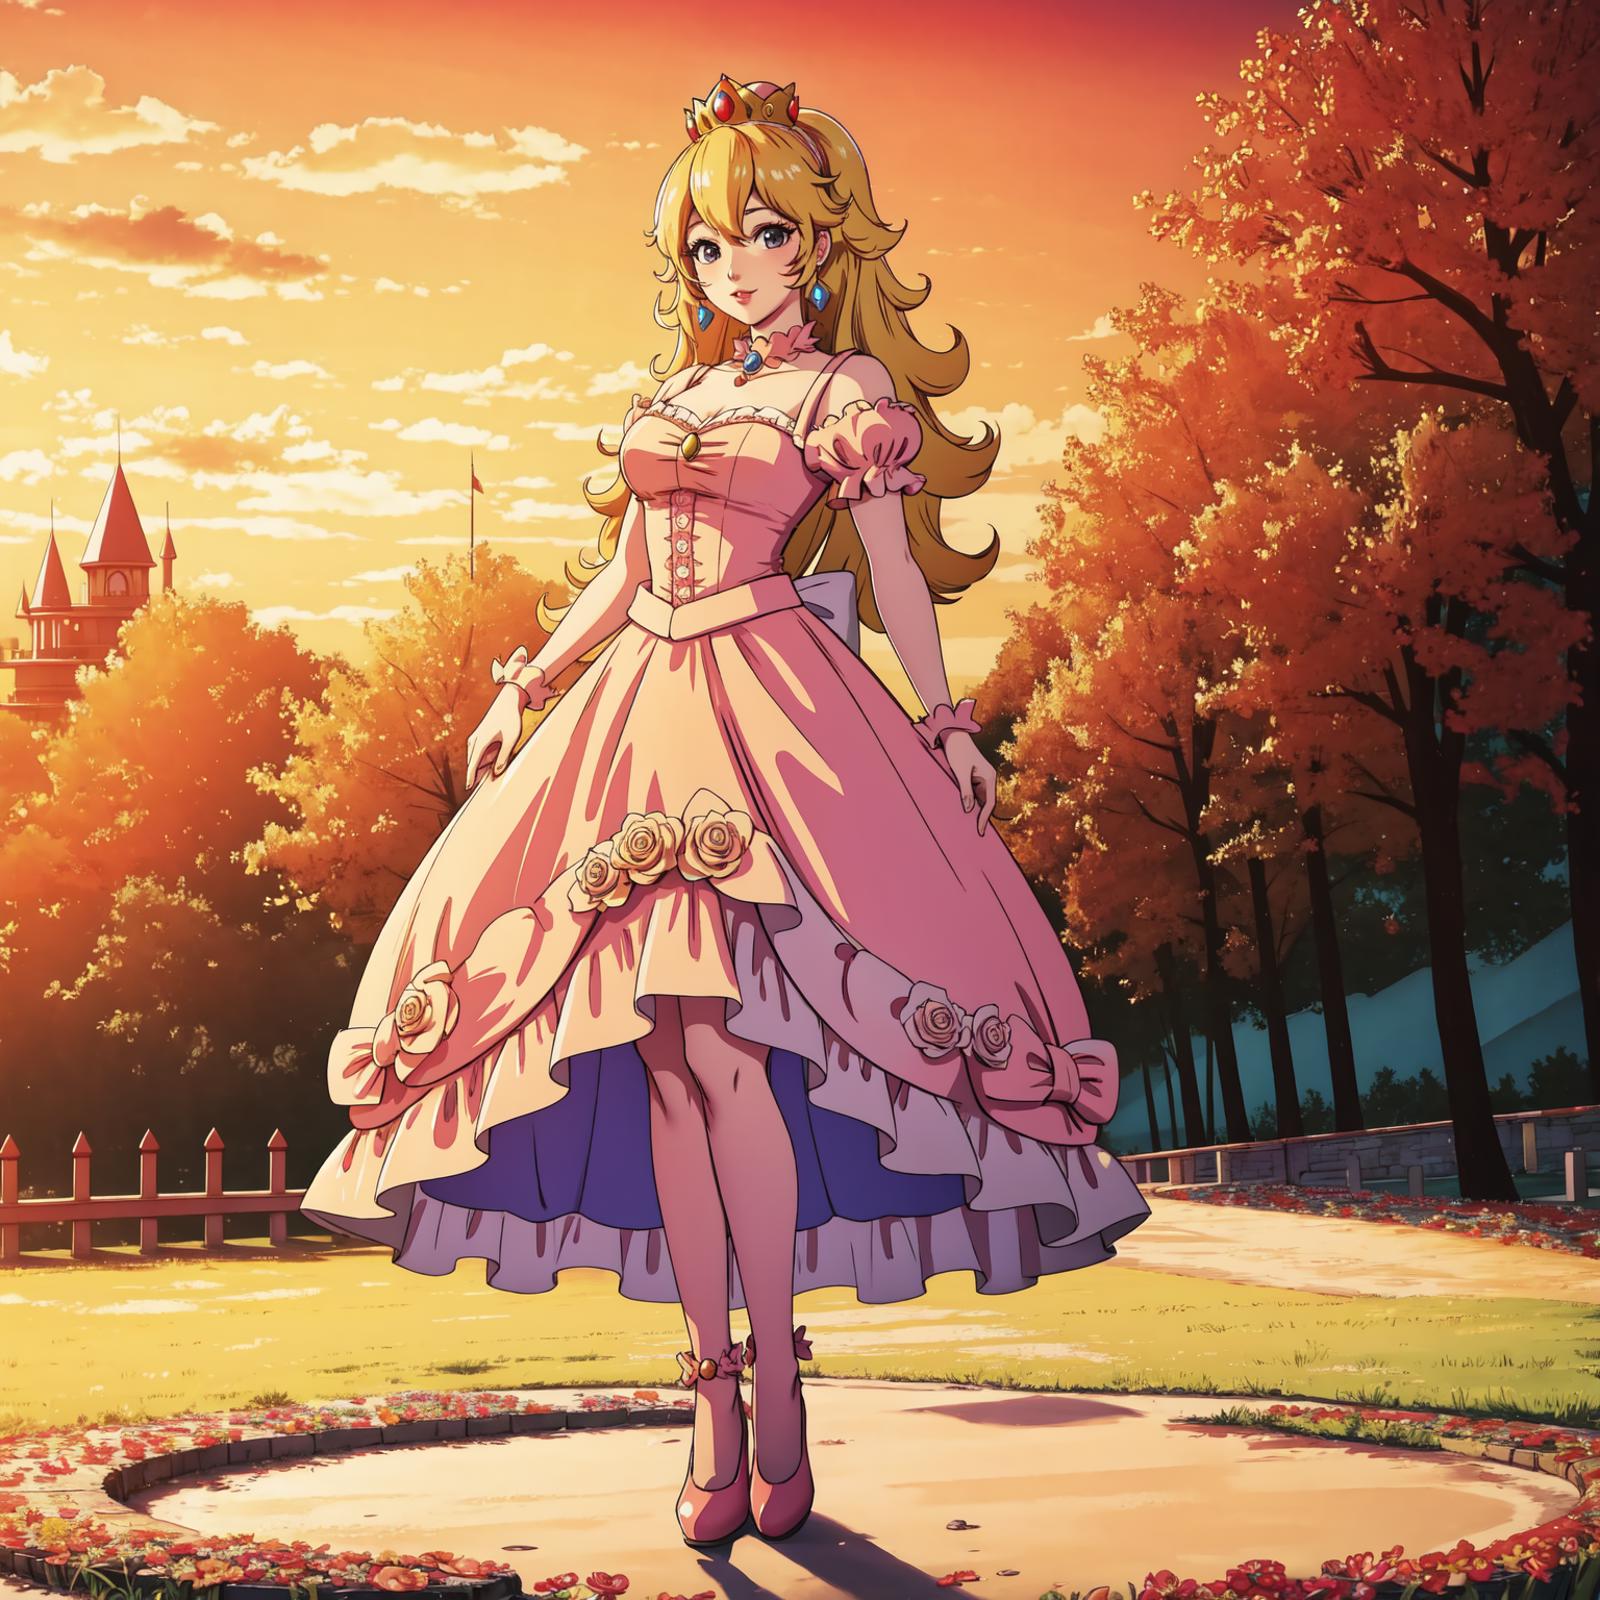 A beautifully drawn cartoon princess in a pink dress with yellow hair and blue eyes, standing in a sunny park.